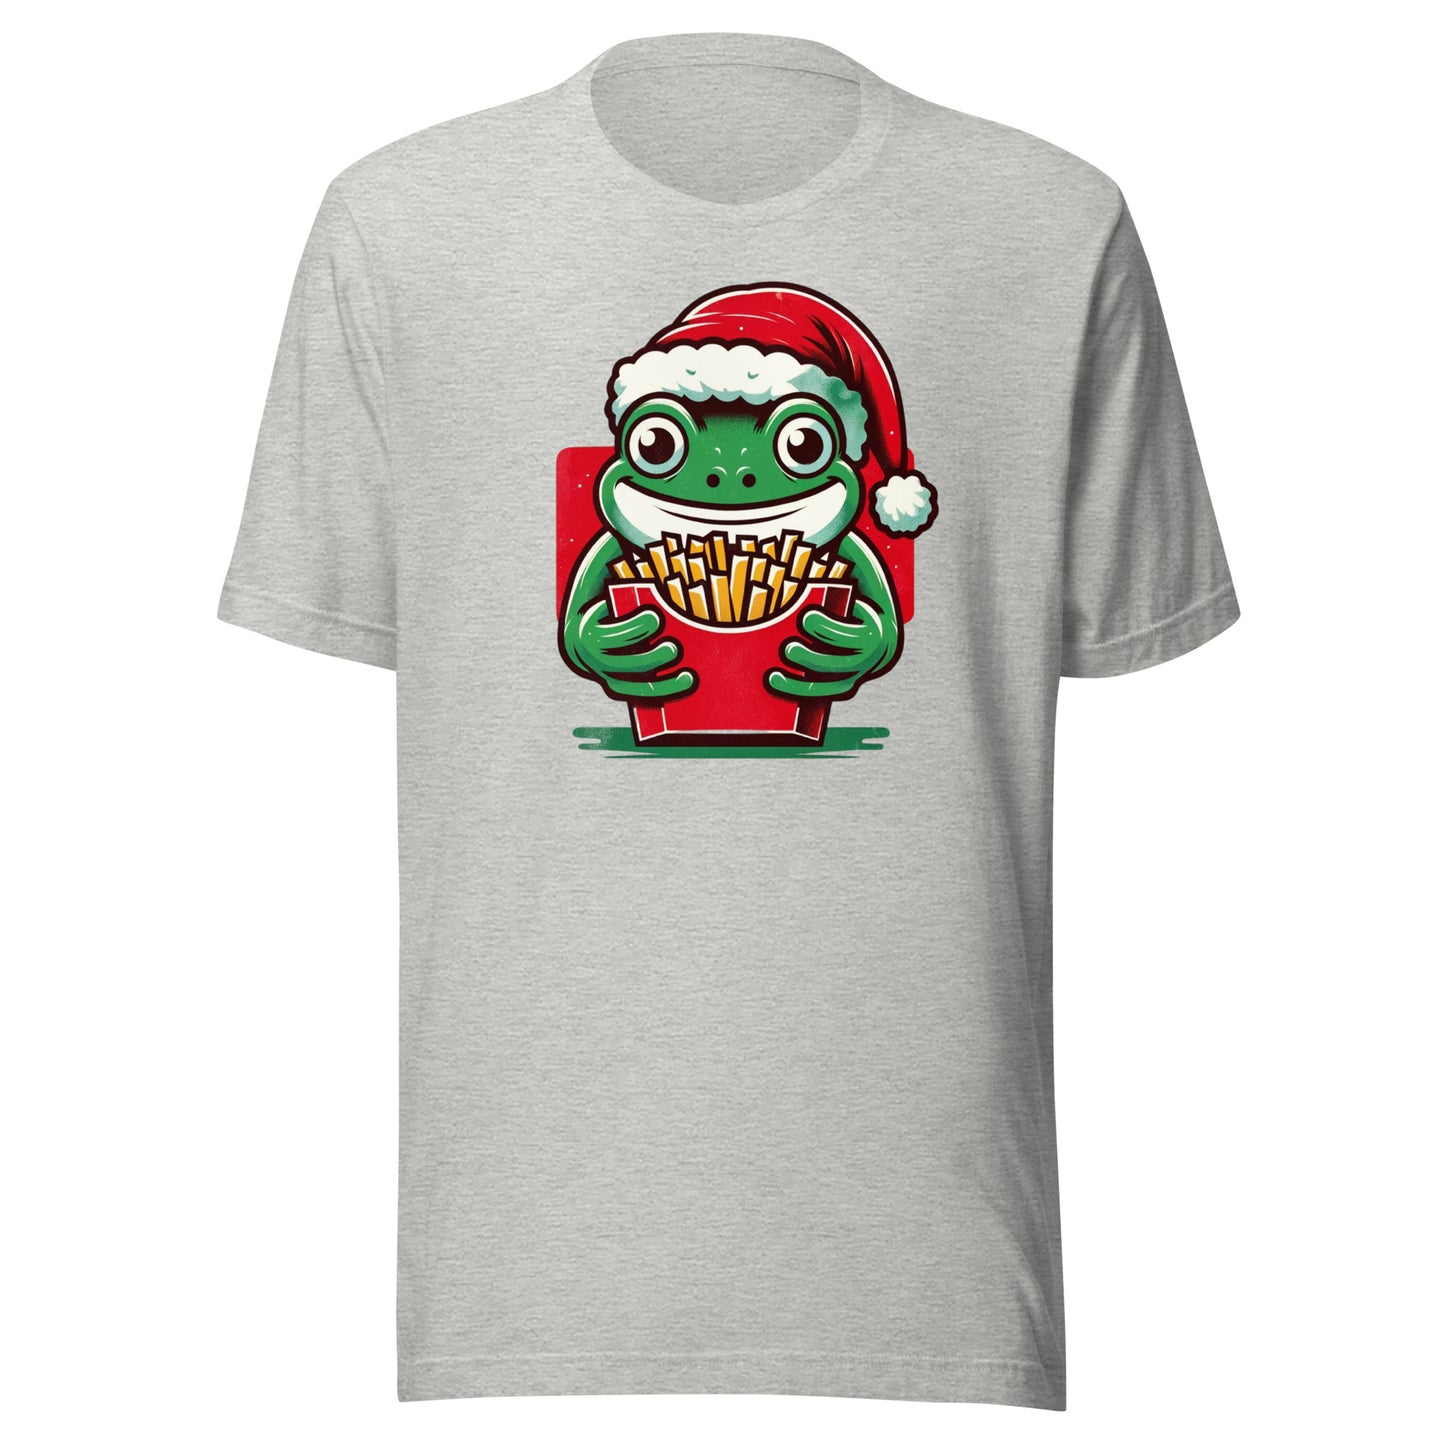 Christmas Cheer with a Side of Fries: A Jolly Frog's Festive Feast Unisex t-shirt